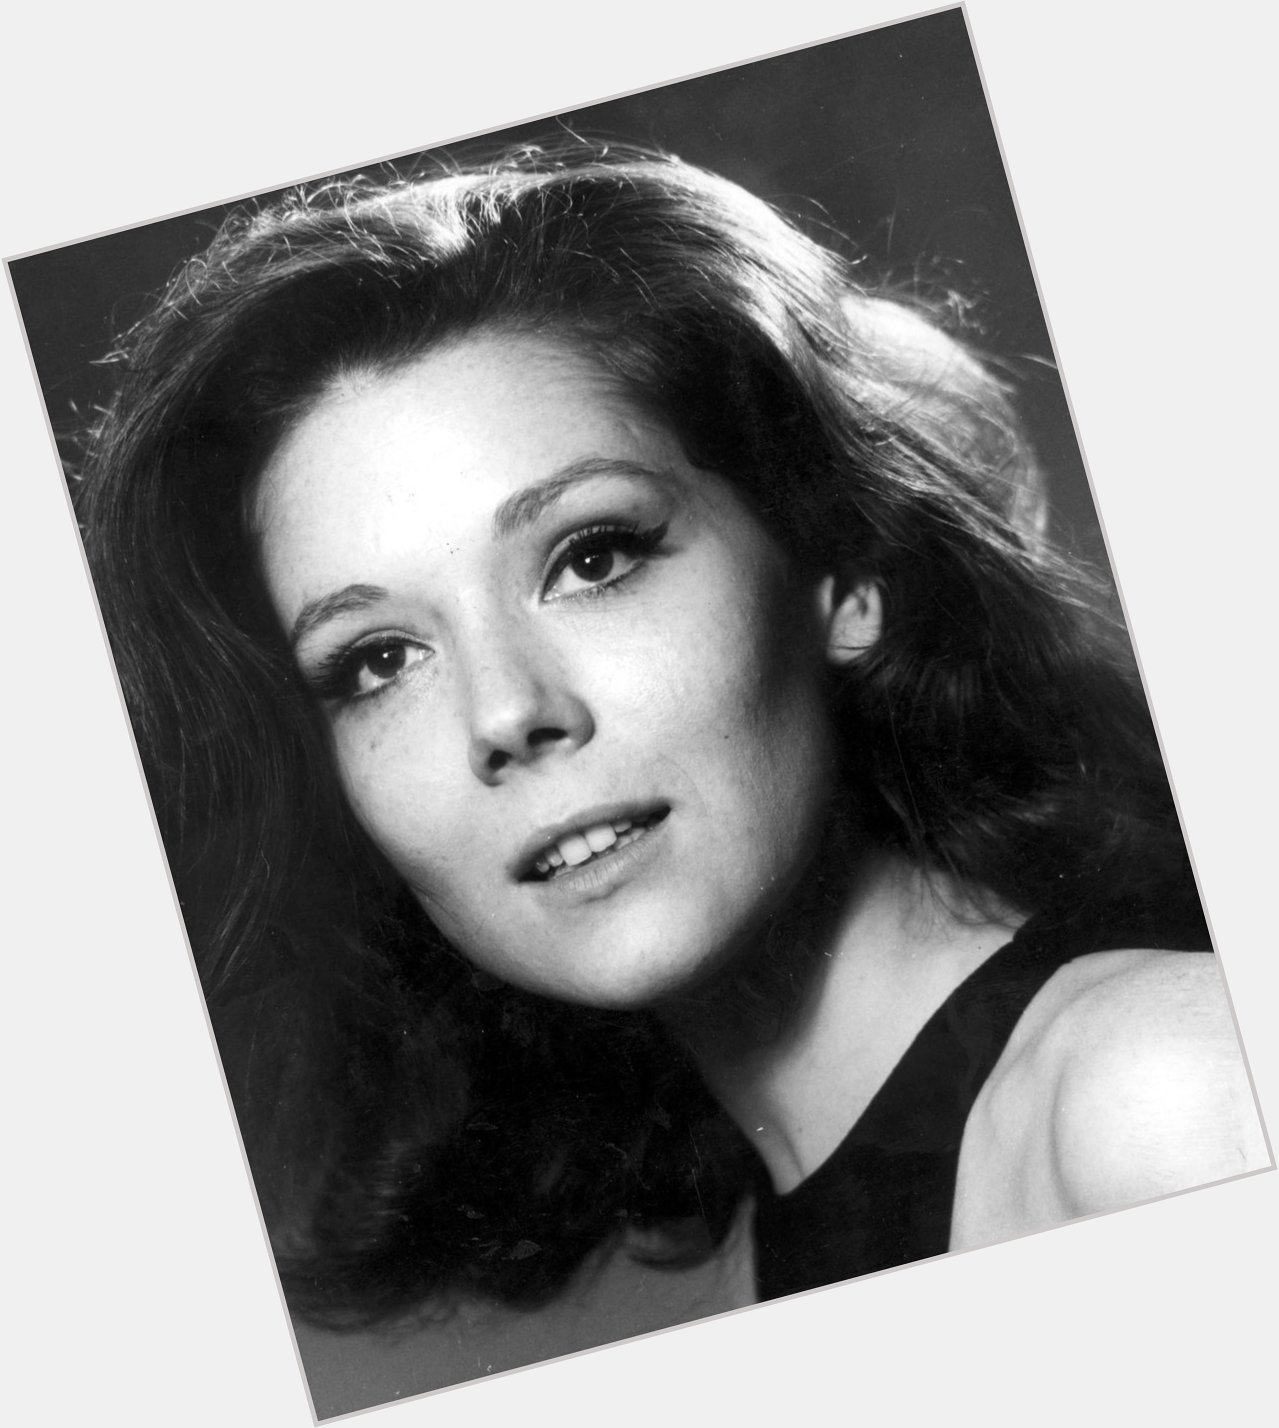 7/20: Happy 77th Birthday 2 amazing actress Diana Rigg! Stage, Movies, TV- Legend 4 The Avengers; Game of Thrones!  